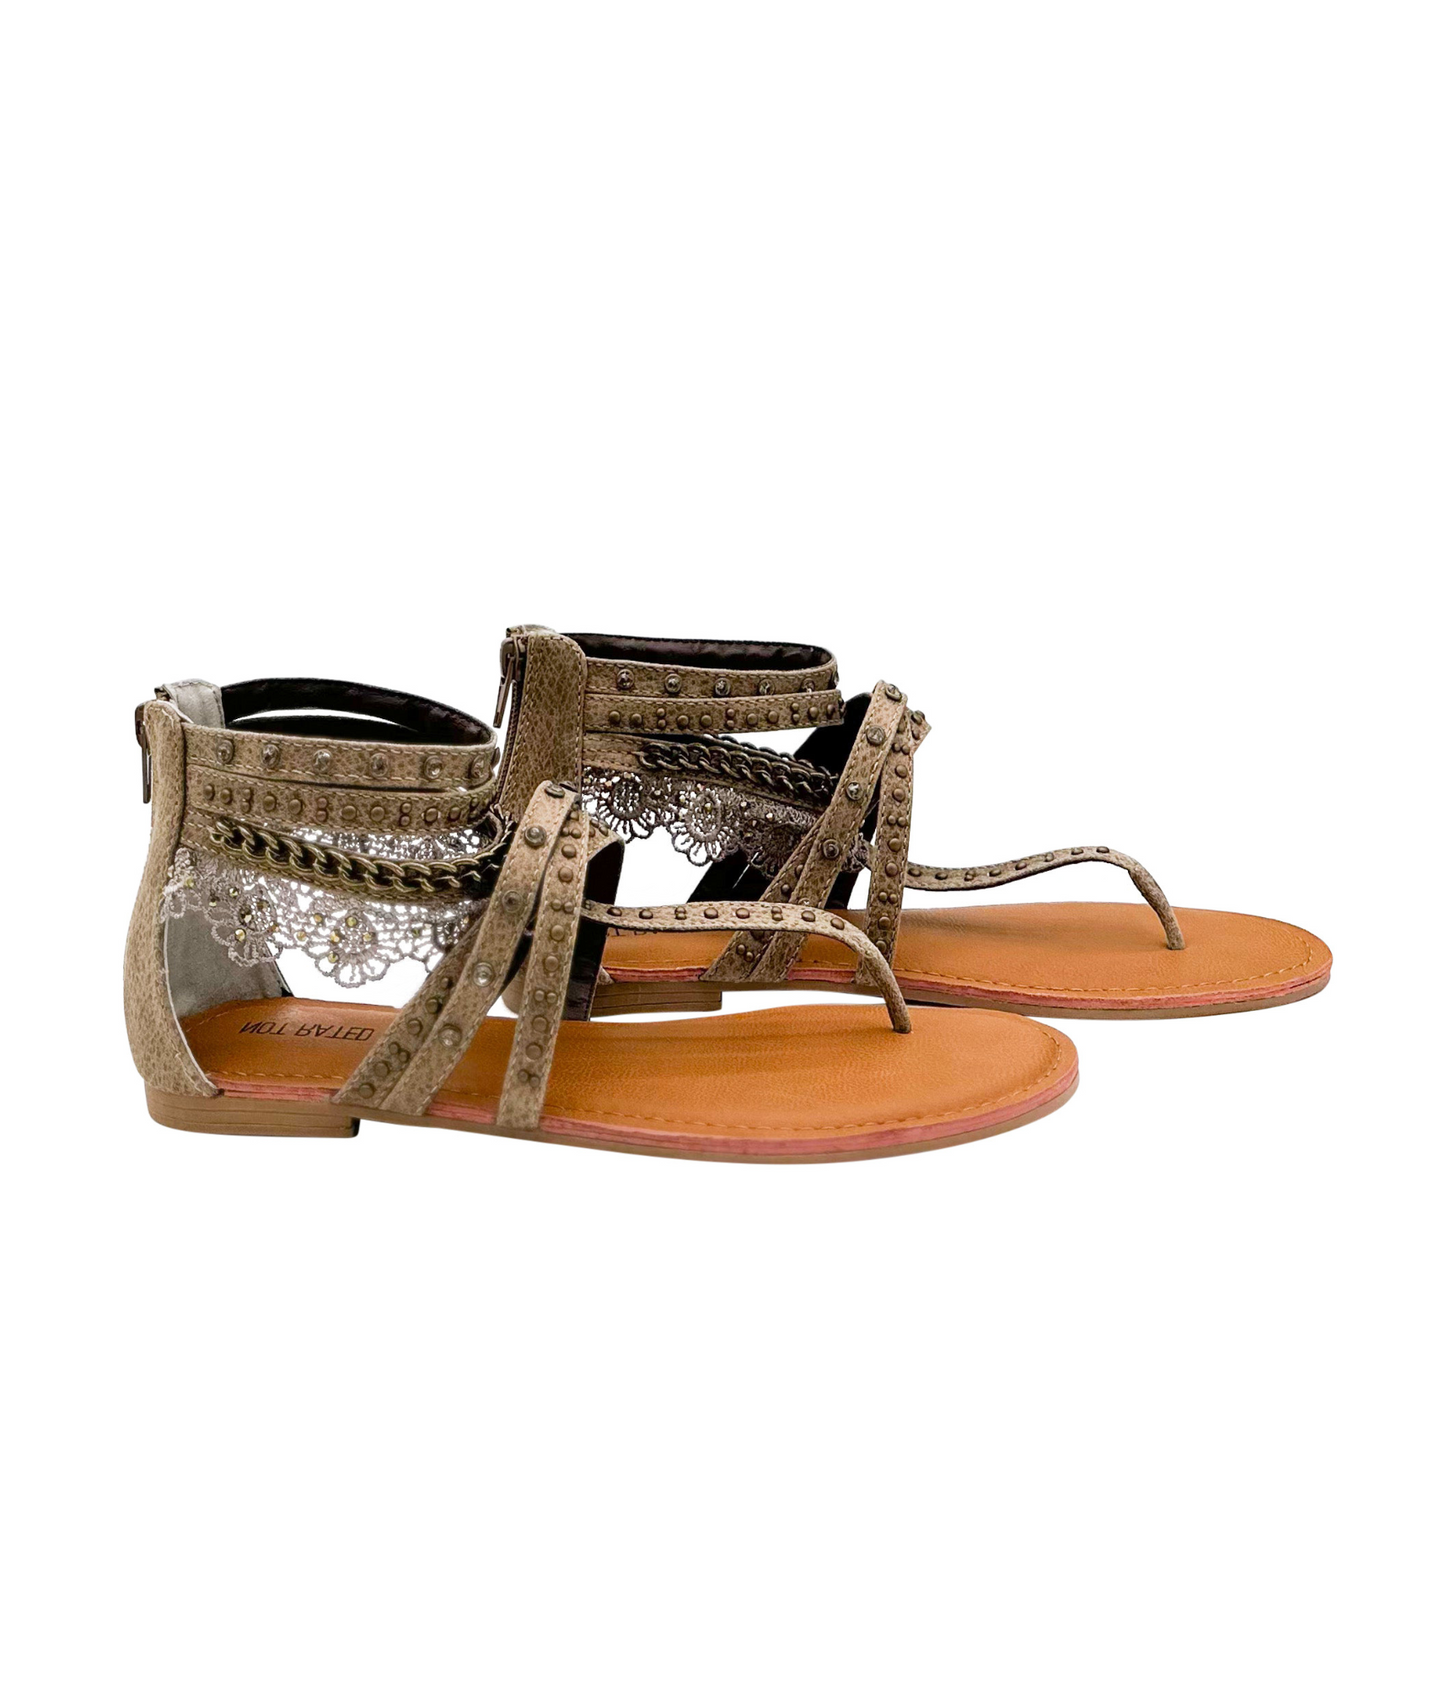 Willow Sandal in Taupe - Rural Haze